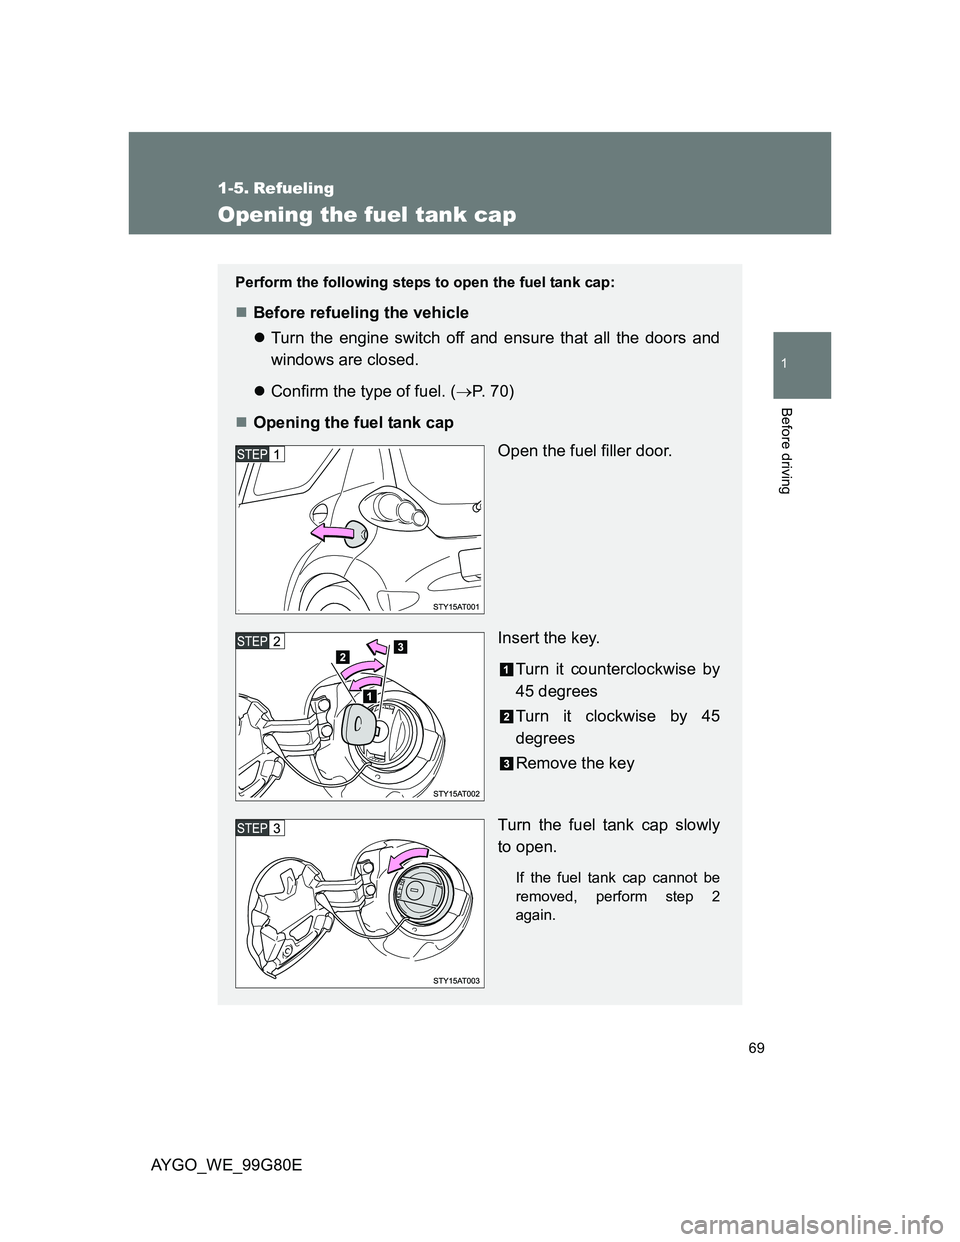 TOYOTA AYGO 2013  Owners Manual (in English) 69
1
Before driving
AYGO_WE_99G80E
1-5. Refueling
Opening the fuel tank cap
Perform the following steps to open the fuel tank cap:
Before refueling the vehicle
Turn the engine switch off and ens